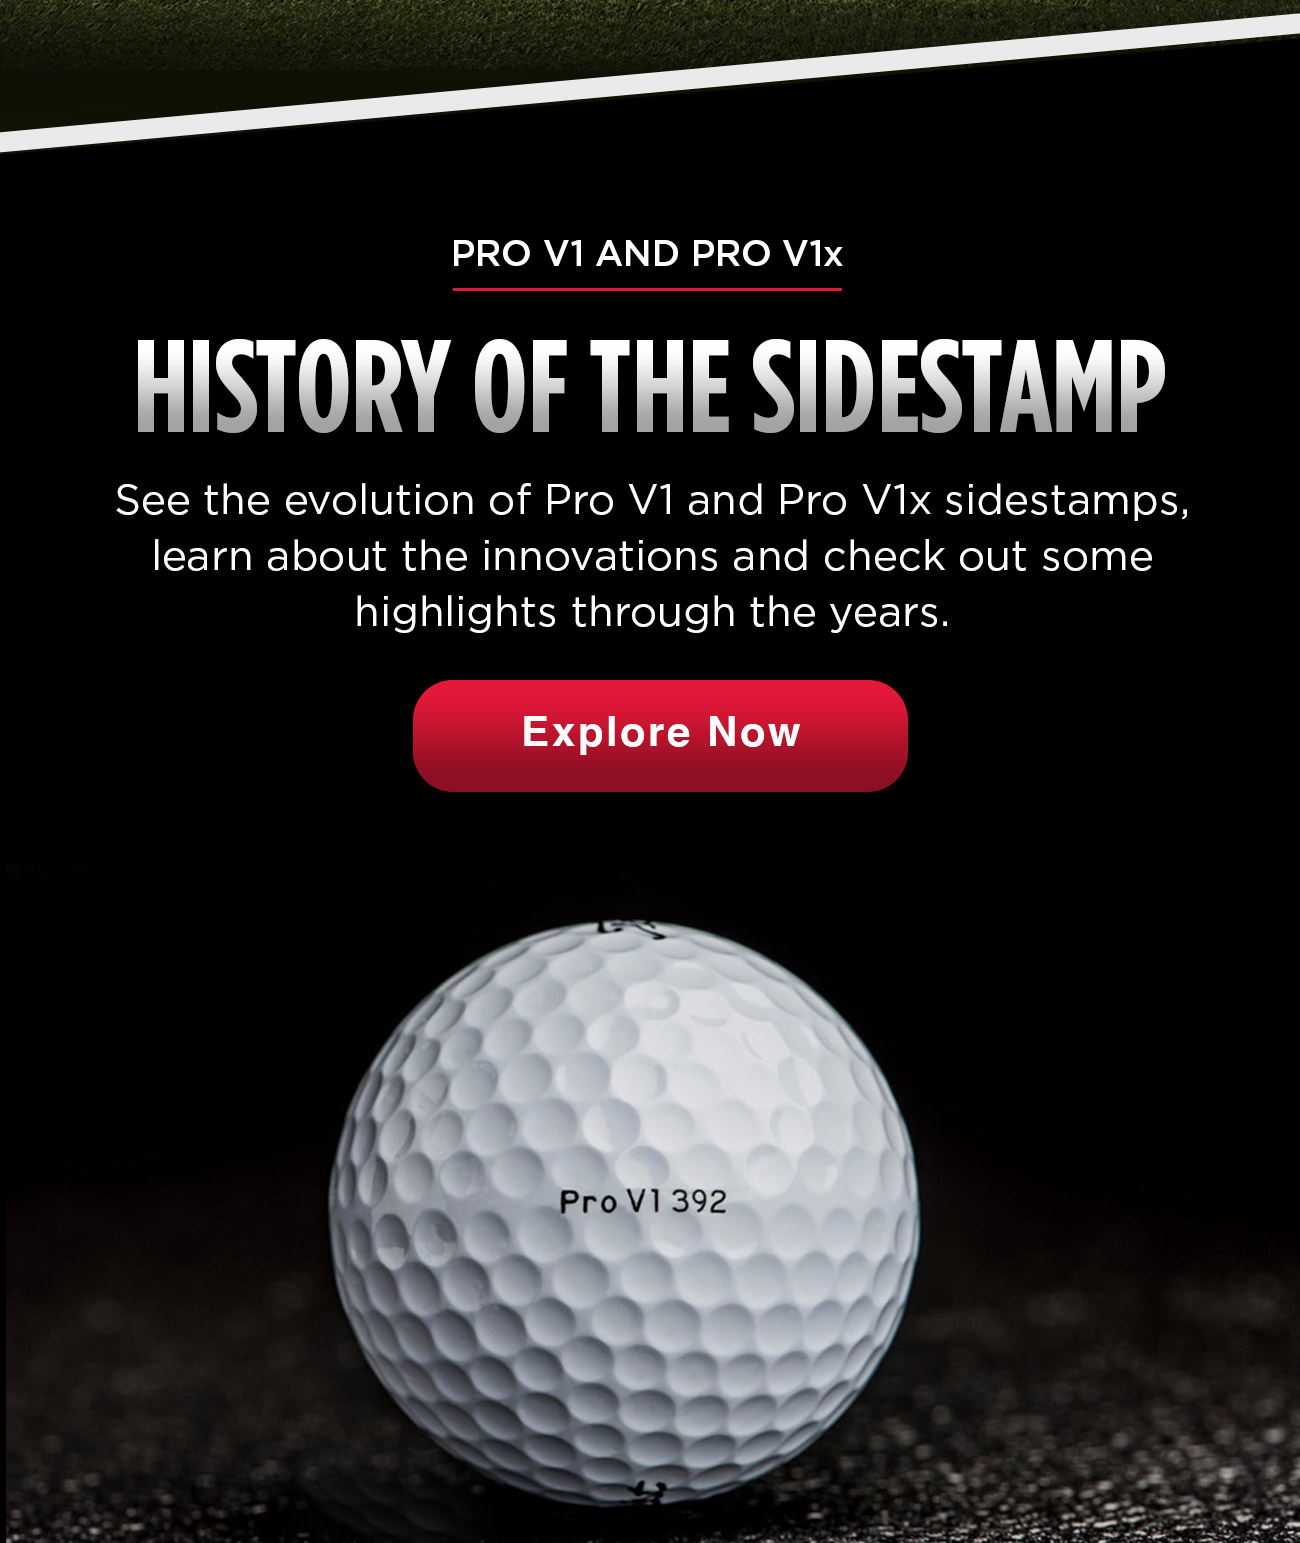 History of the Sidestamp